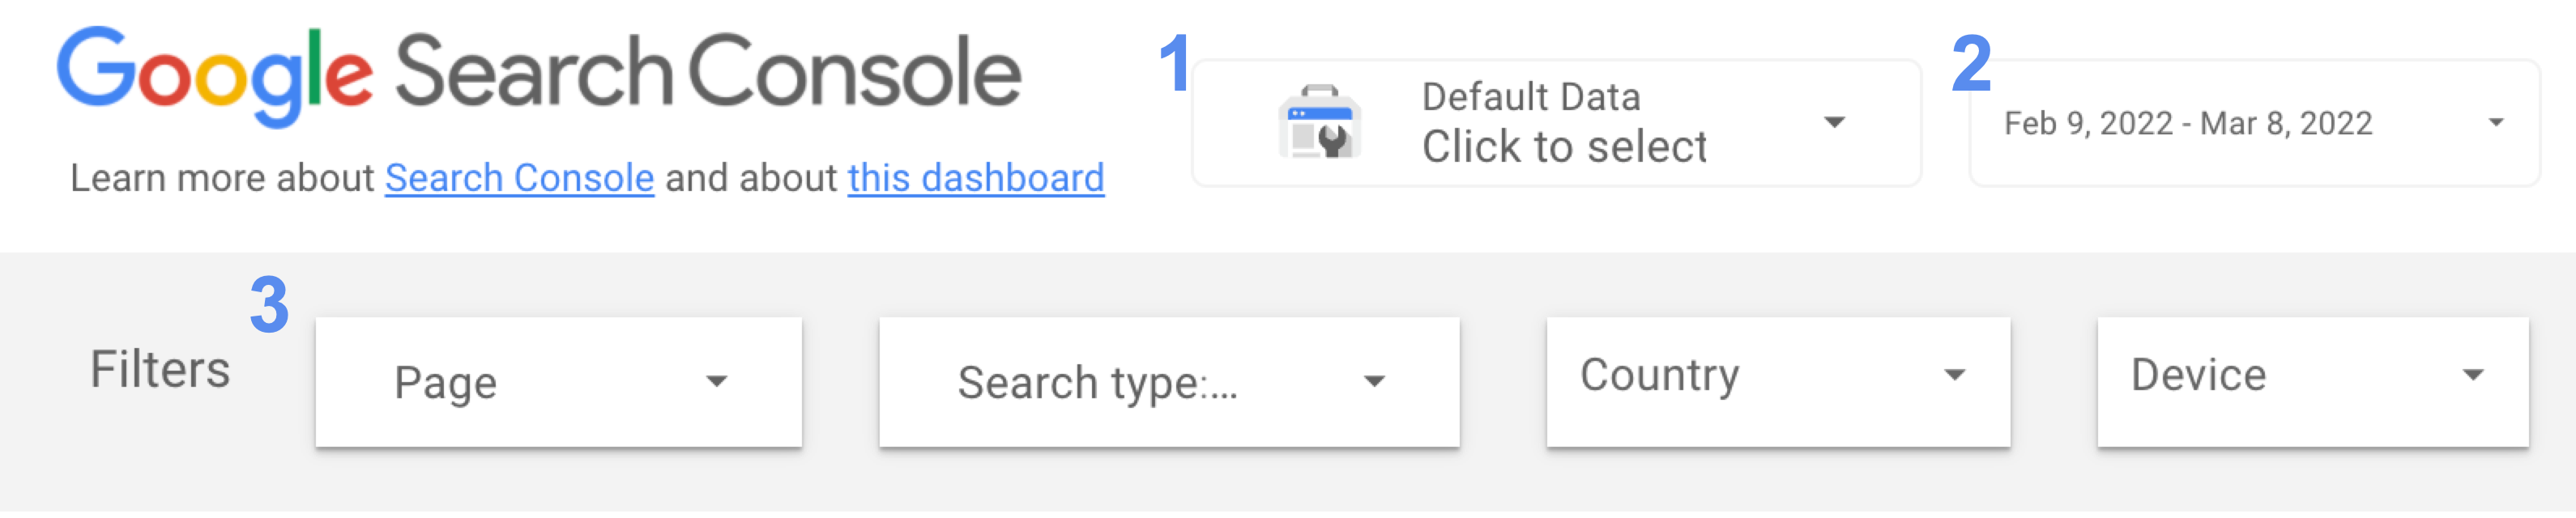 More information about Search Console added to Google Data Studio